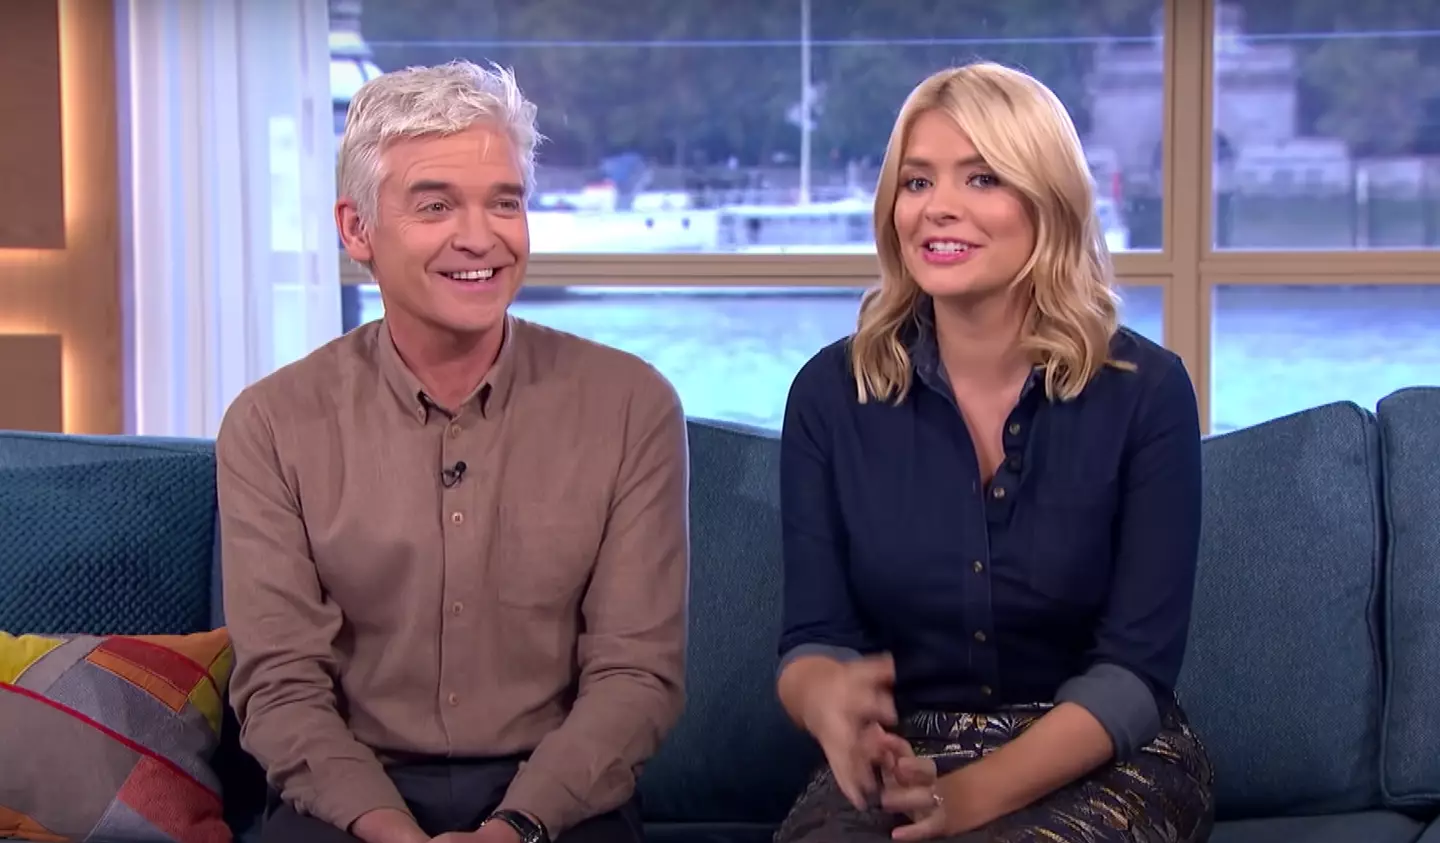 The pair have hosted ITV's This Morning together since 2009.